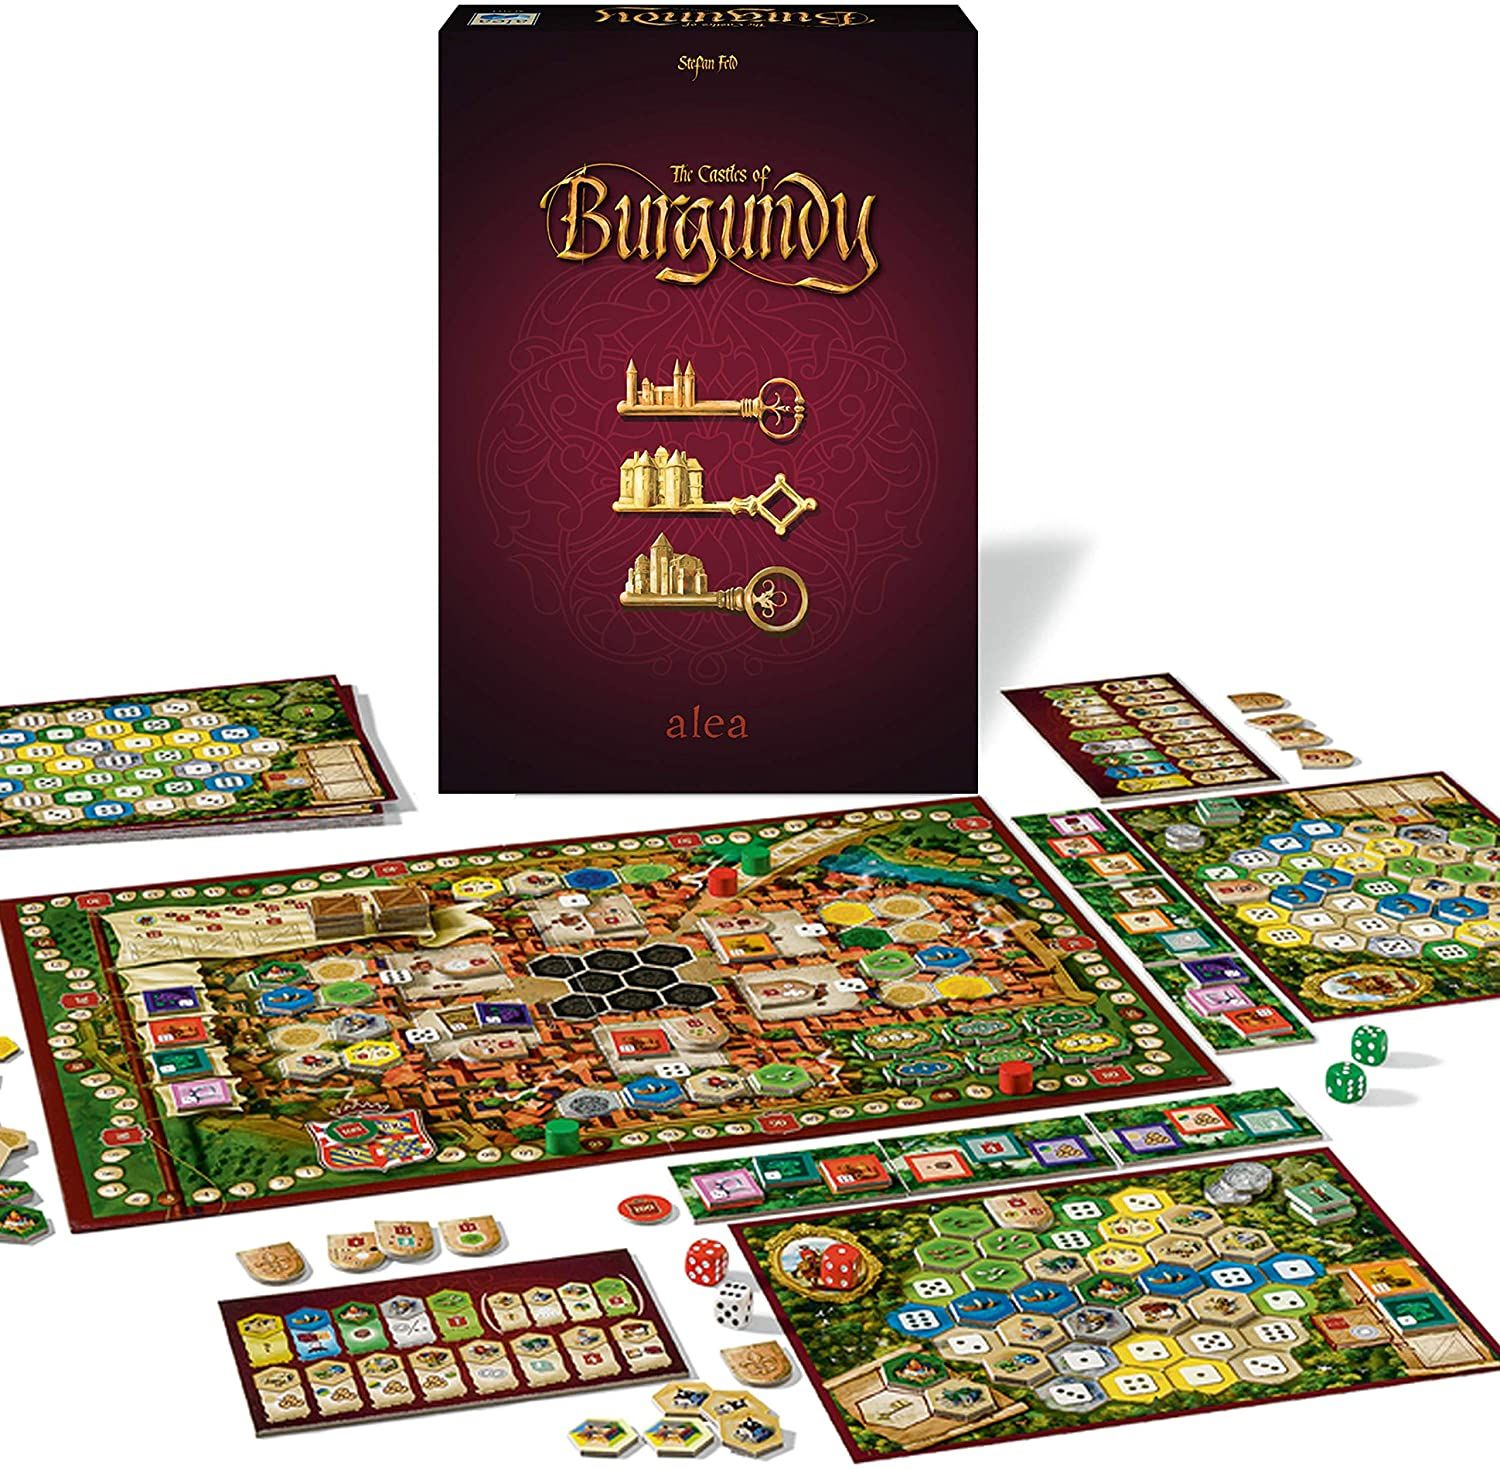 A depiction of the Castles Of Burgundy game box with a setup for four players.